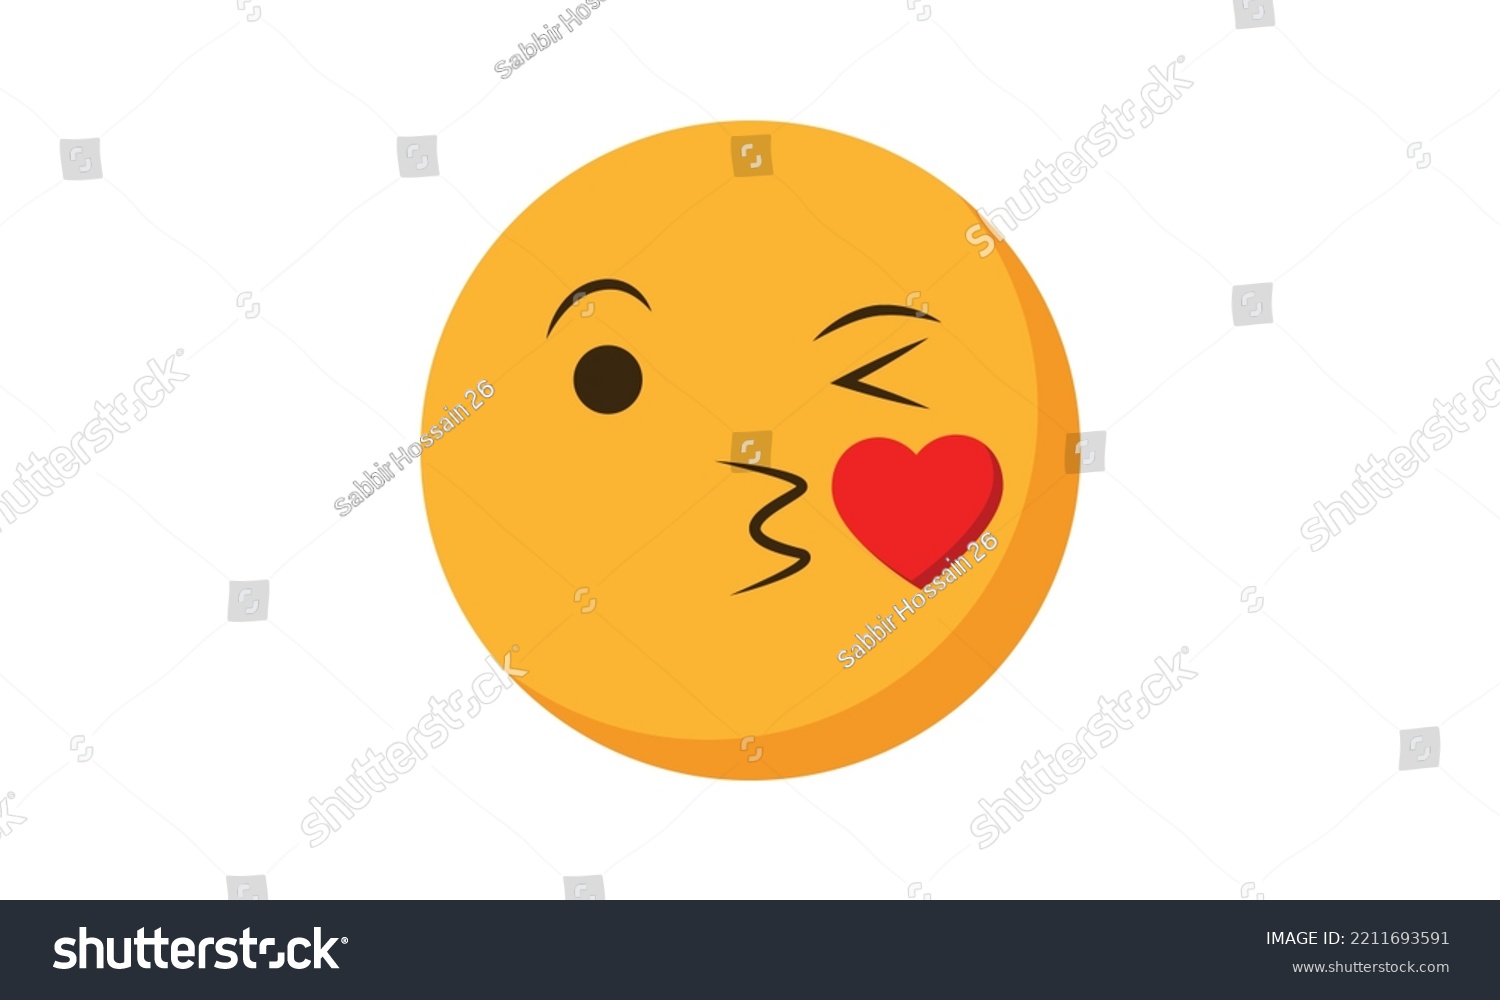 SVG of face blowing a kiss emoji vector, face blowing a kiss for website emoji svg